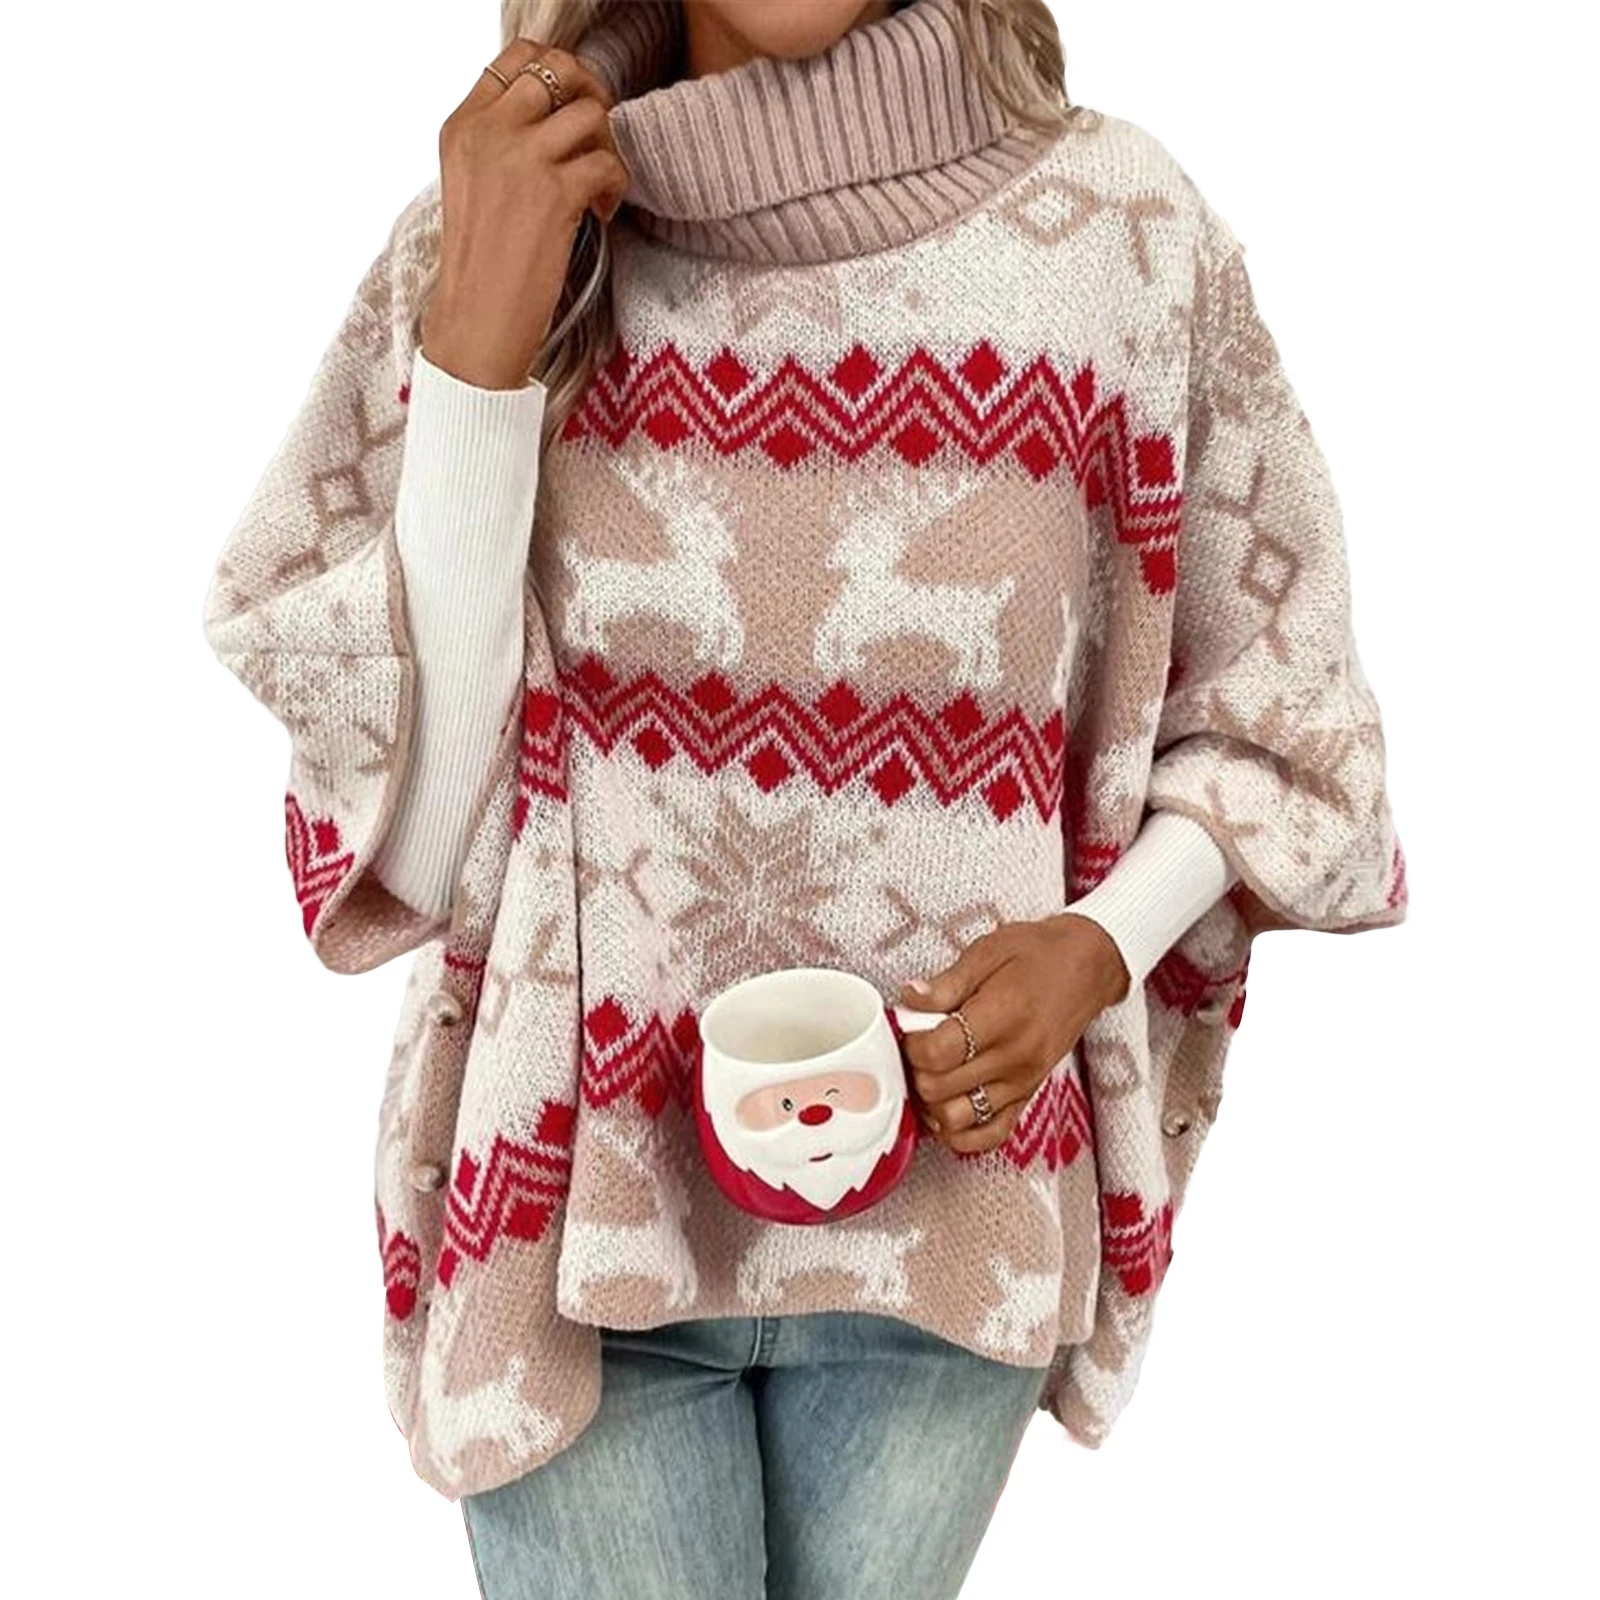 

Autumn and Winter Sweaters New Turtleneck Christmas Sweater Elk Contrast Pattern Bat Sleeve Sweater Oversized Pullover Knit Tops